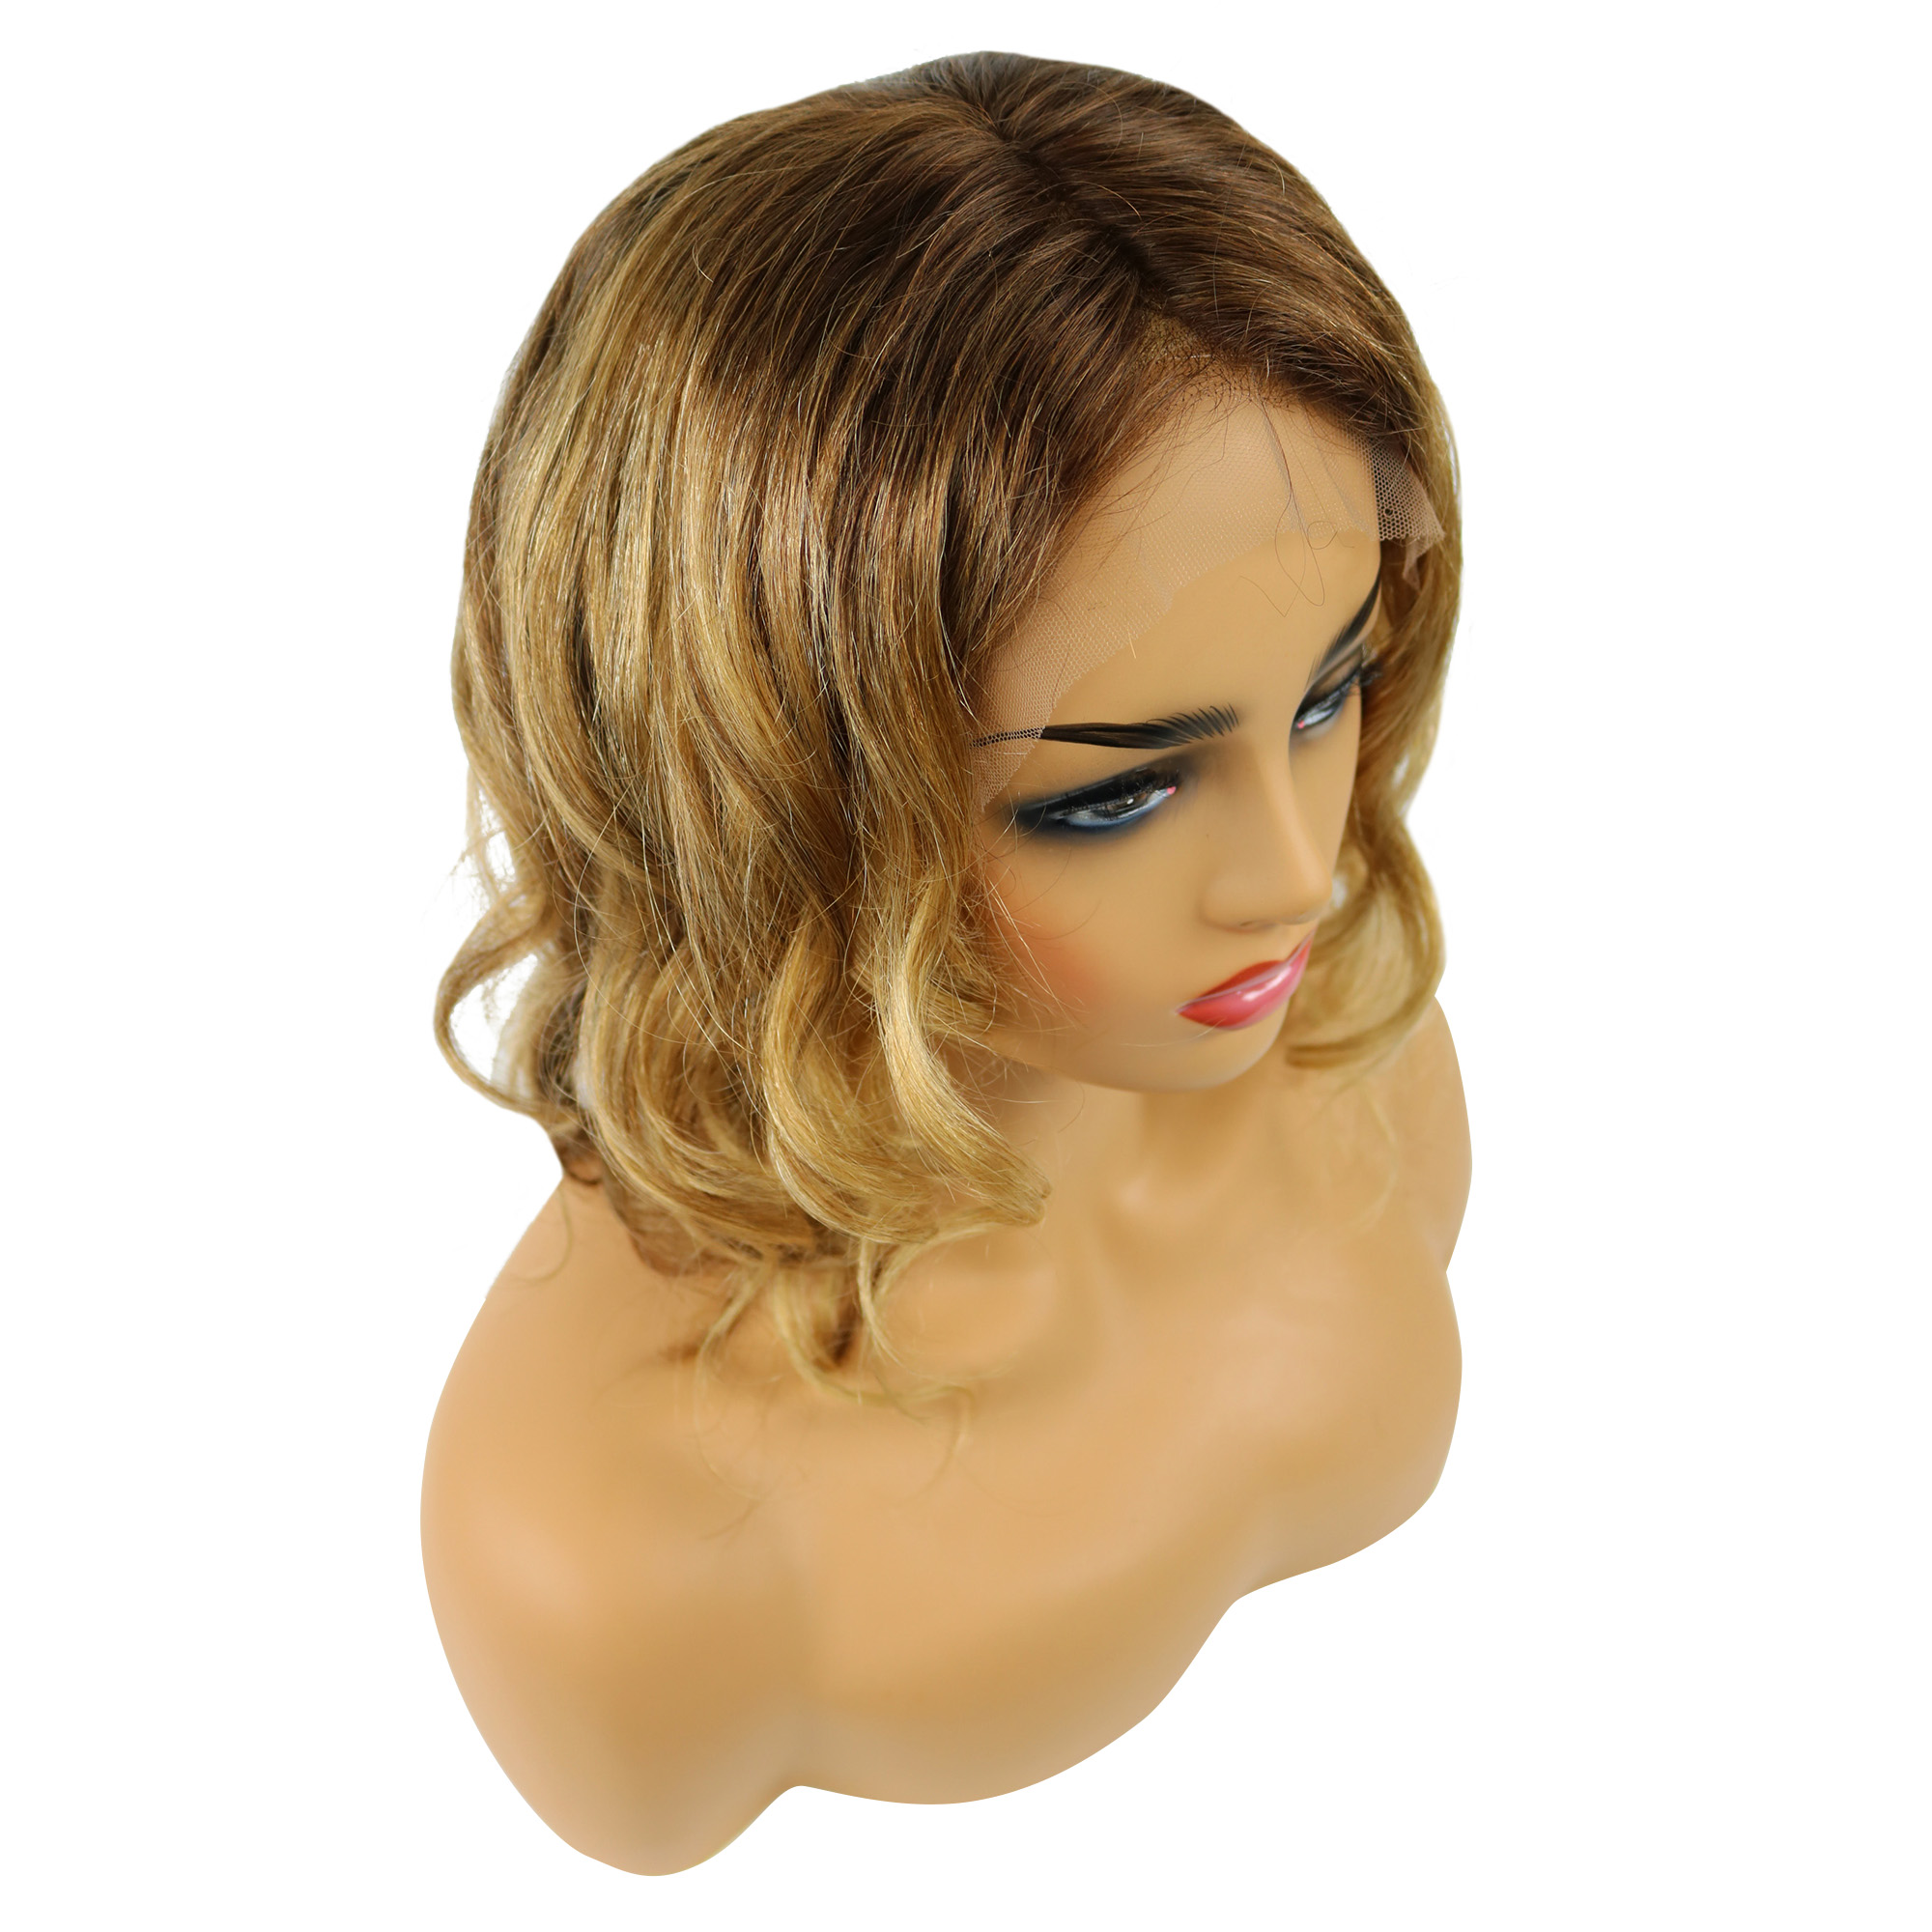 Ericdress Mixed Color Short Bob Hairstyle Women's Wavy Human Hair Lace Front Wigs 12 Inches